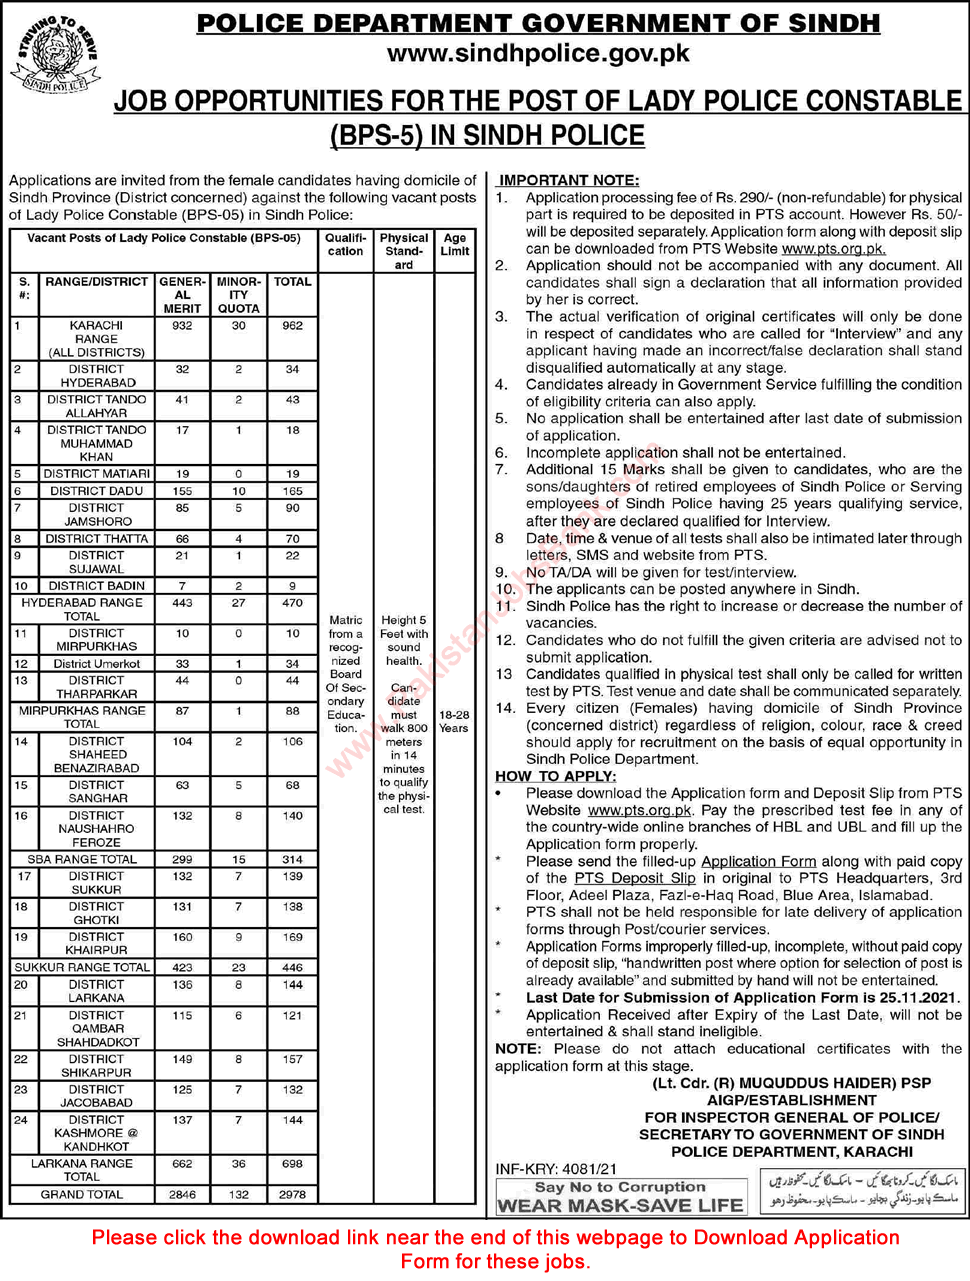 Lady Police Constable Jobs in Sindh Police November 2021 PTS Application Form Latest